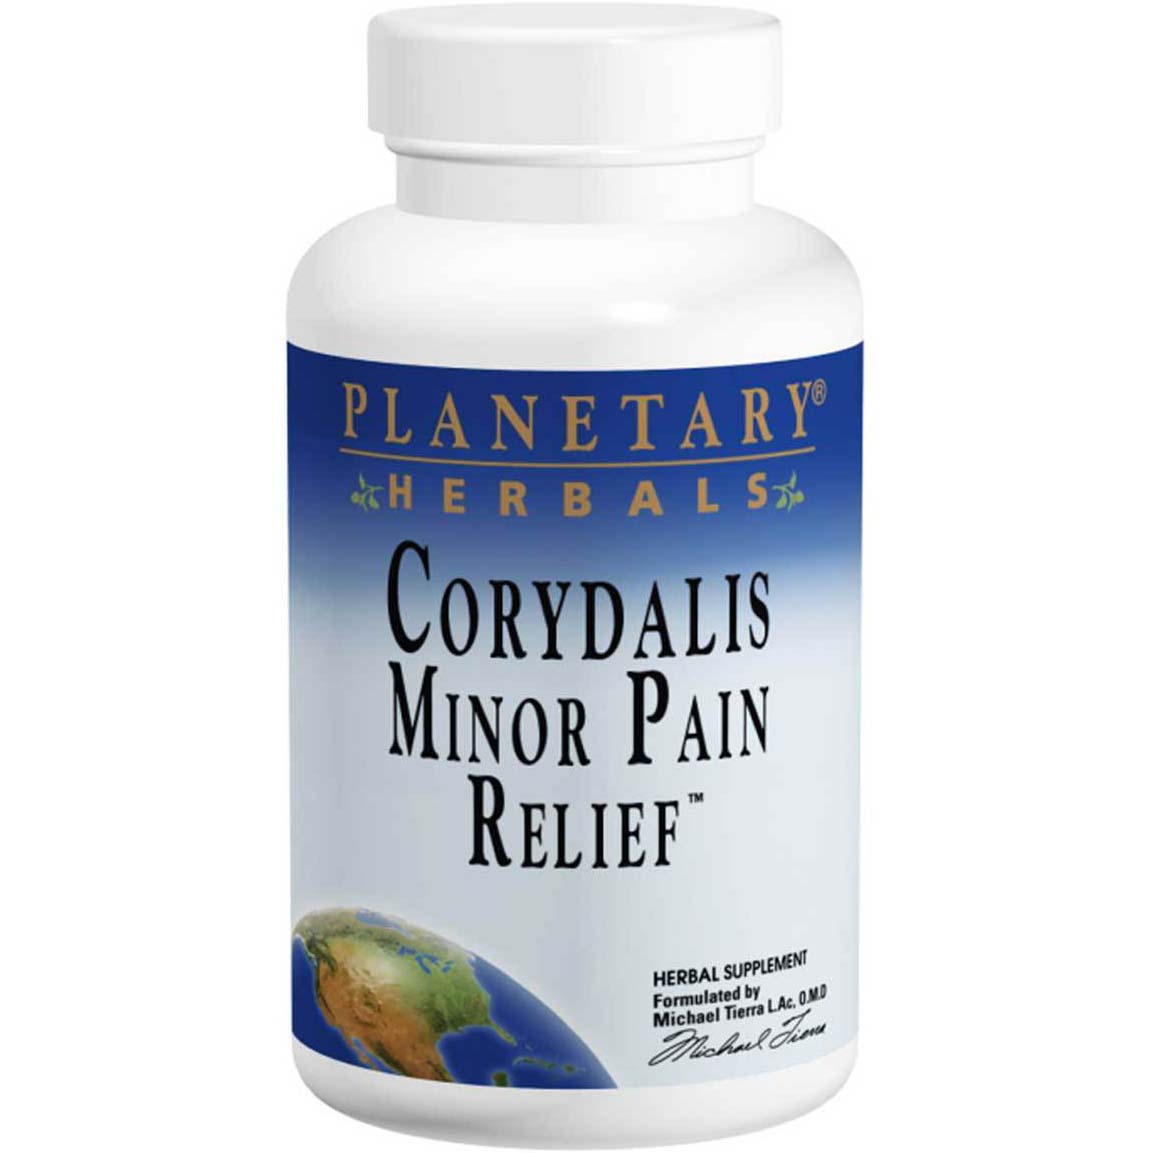 Planetary Herbals Corydalis Minor Pain Relief, 750 mg, 30 Tablets